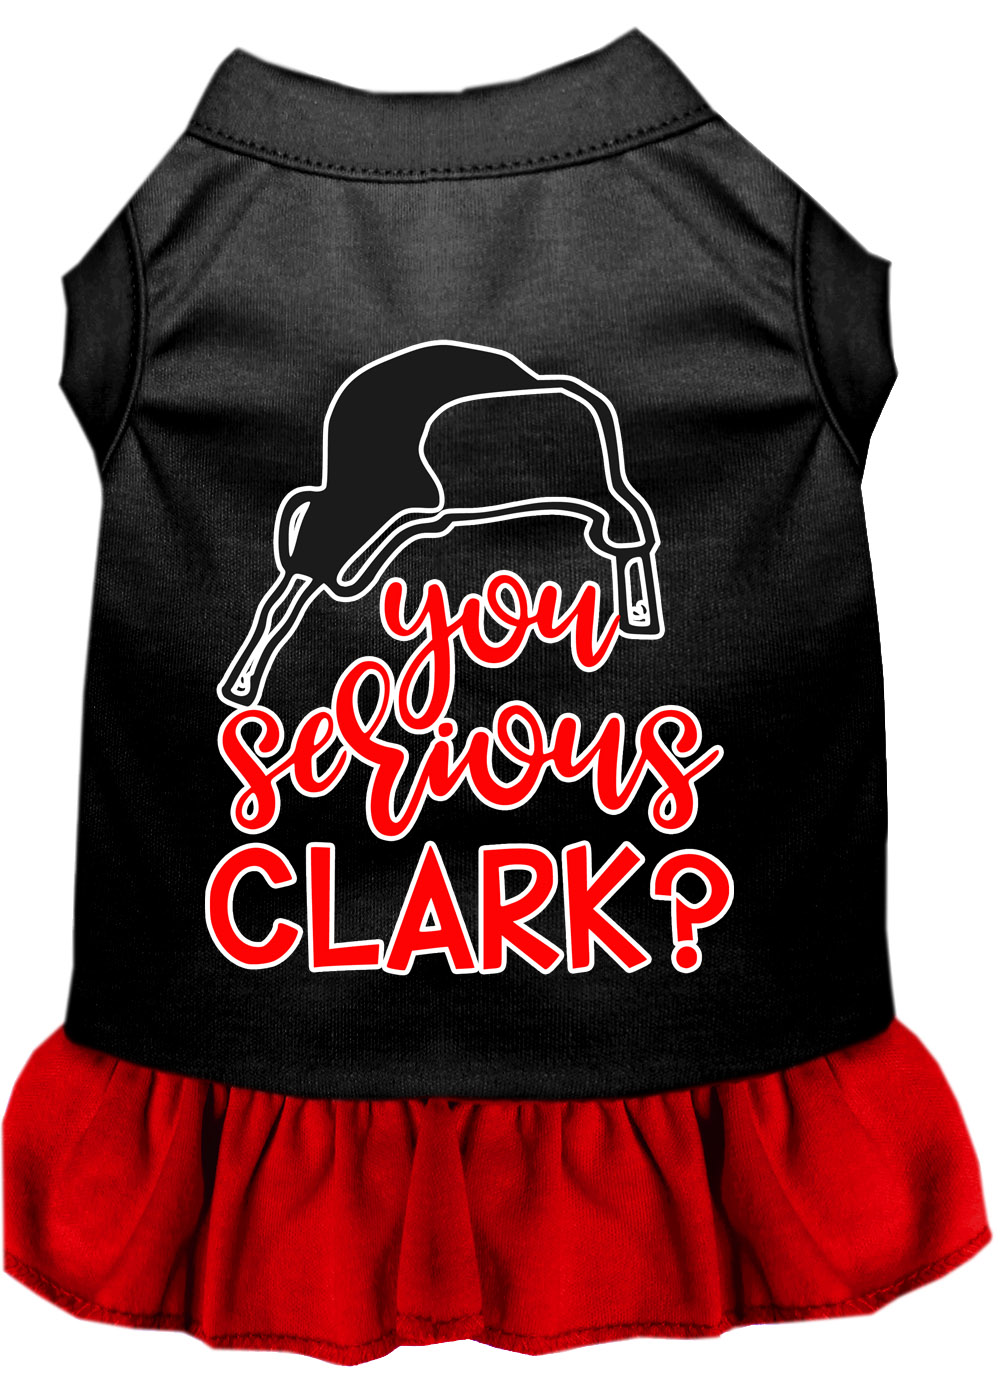 You Serious Clark? Screen Print Dog Dress Black with Red Med